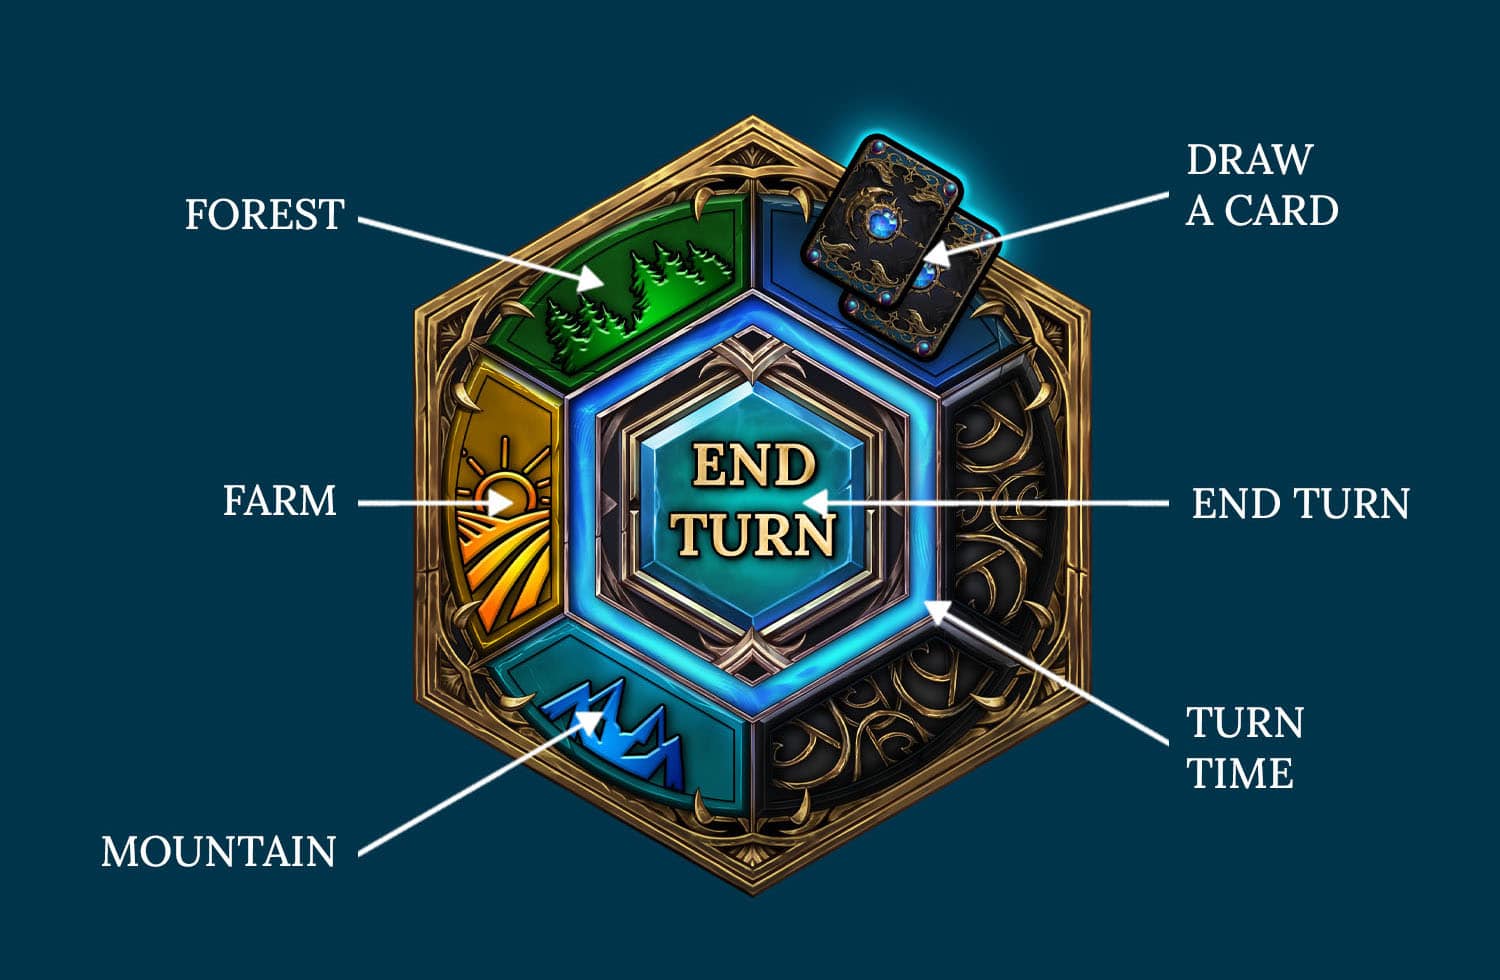 Hex of Actions is located in the right-bottom corner of the screen. It allows players to perform up to 2 actions available on it per turn.